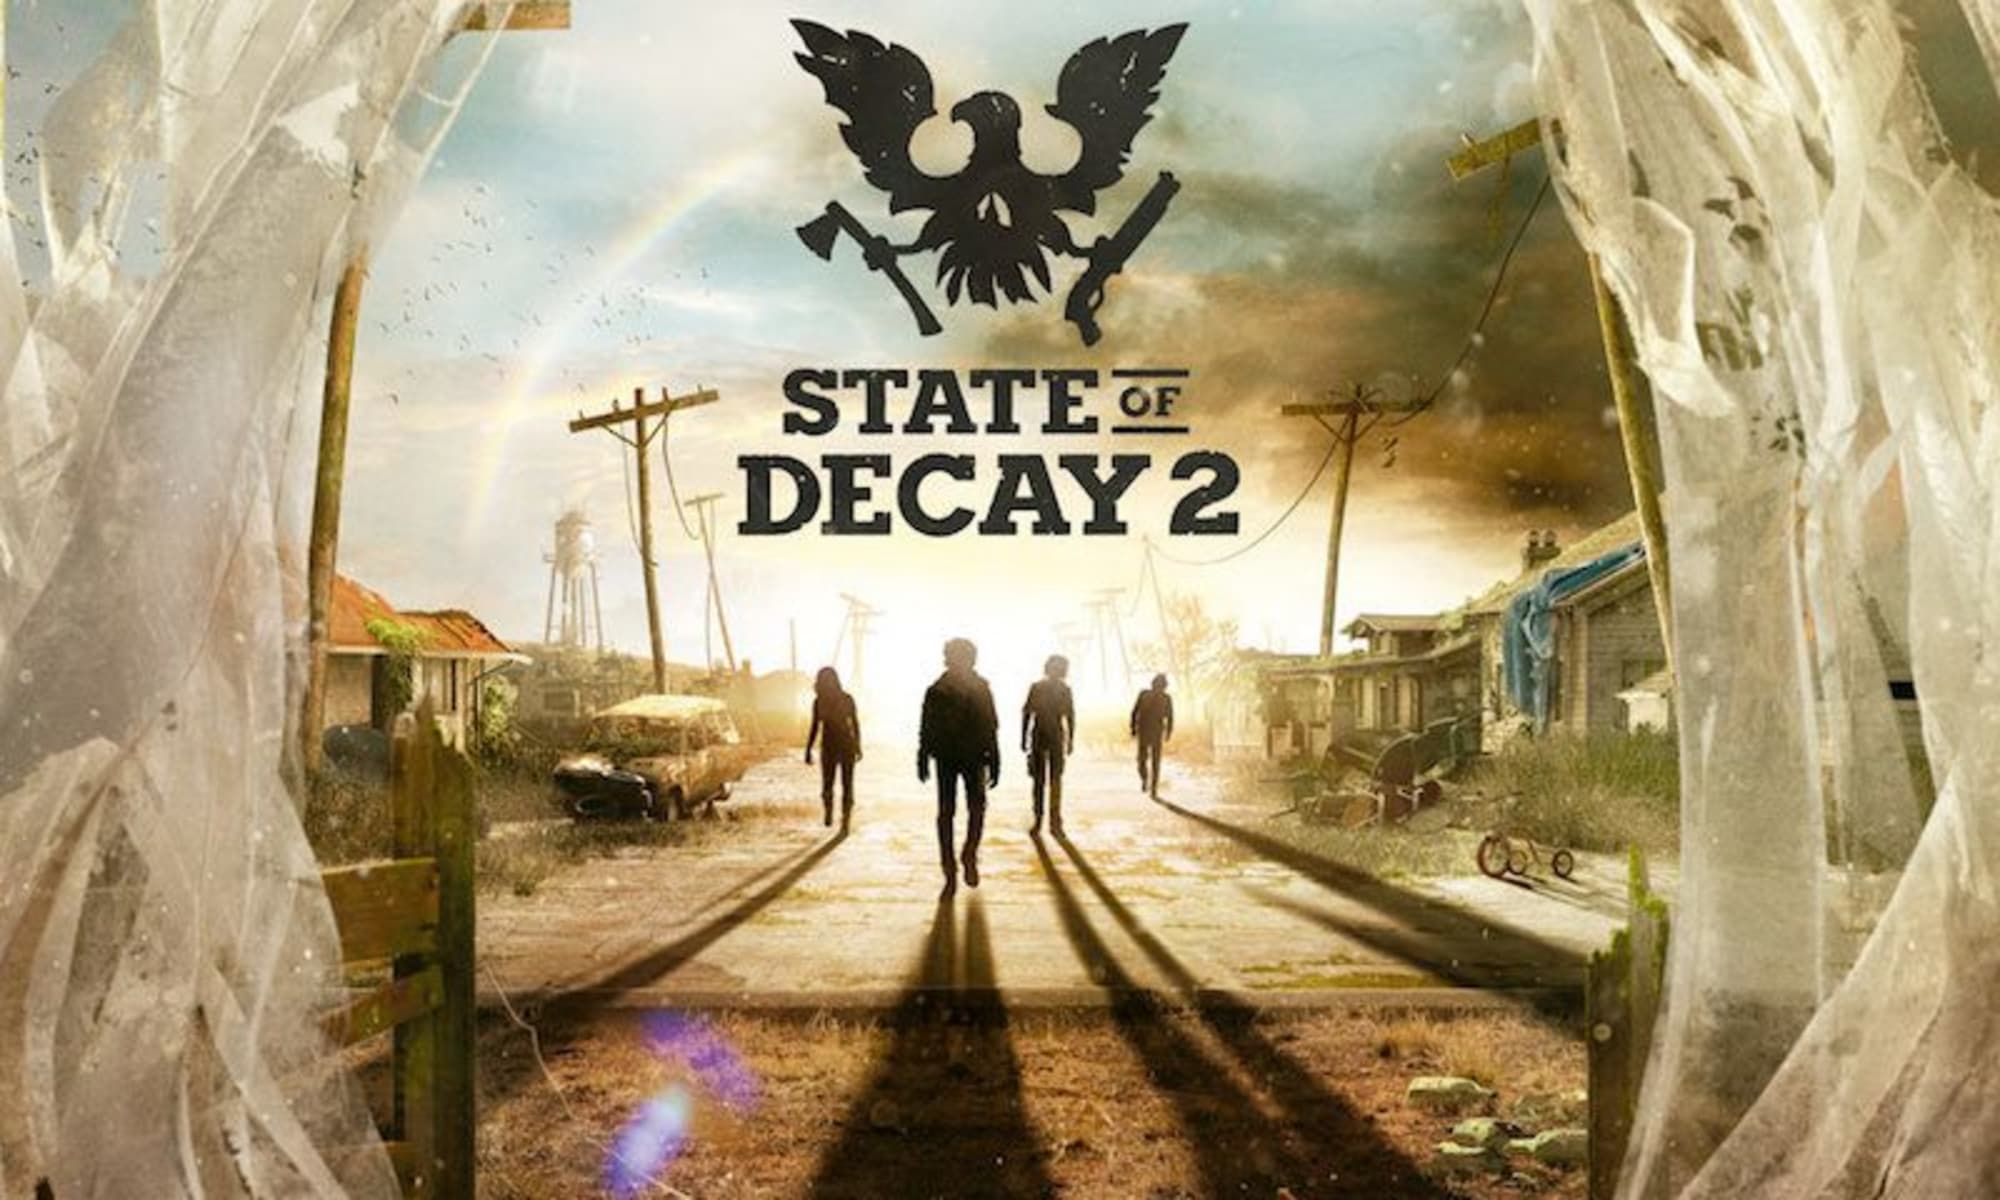 State of Decay 2 review: Braindead apocalyptic survival